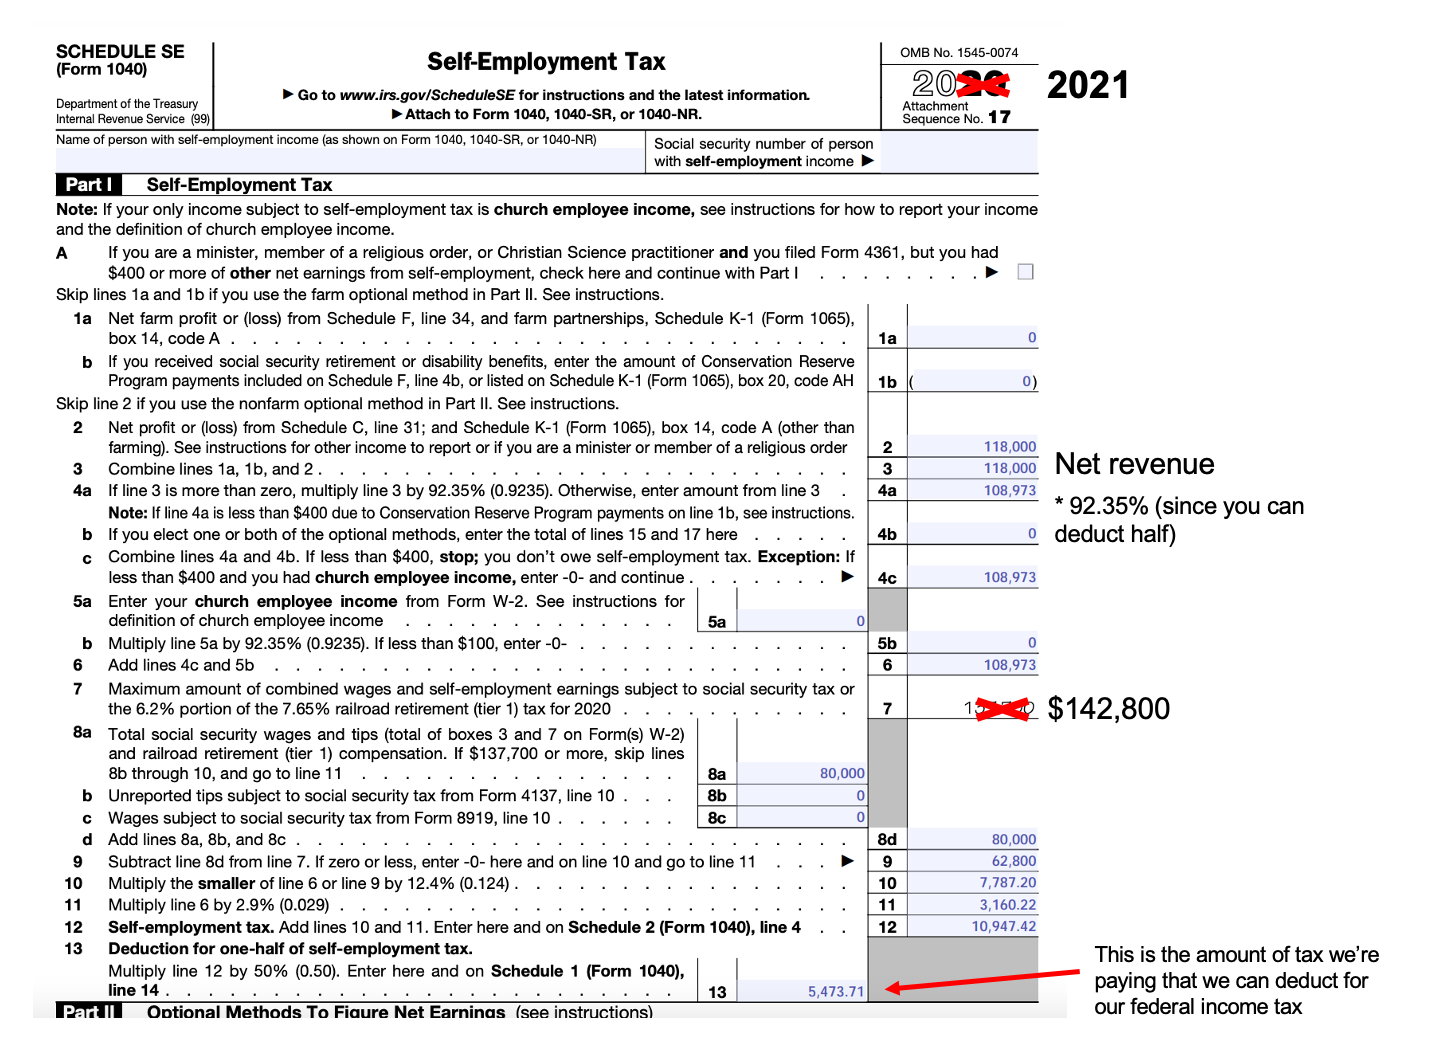 calculate-self-employment-tax-deduction-shannontroy